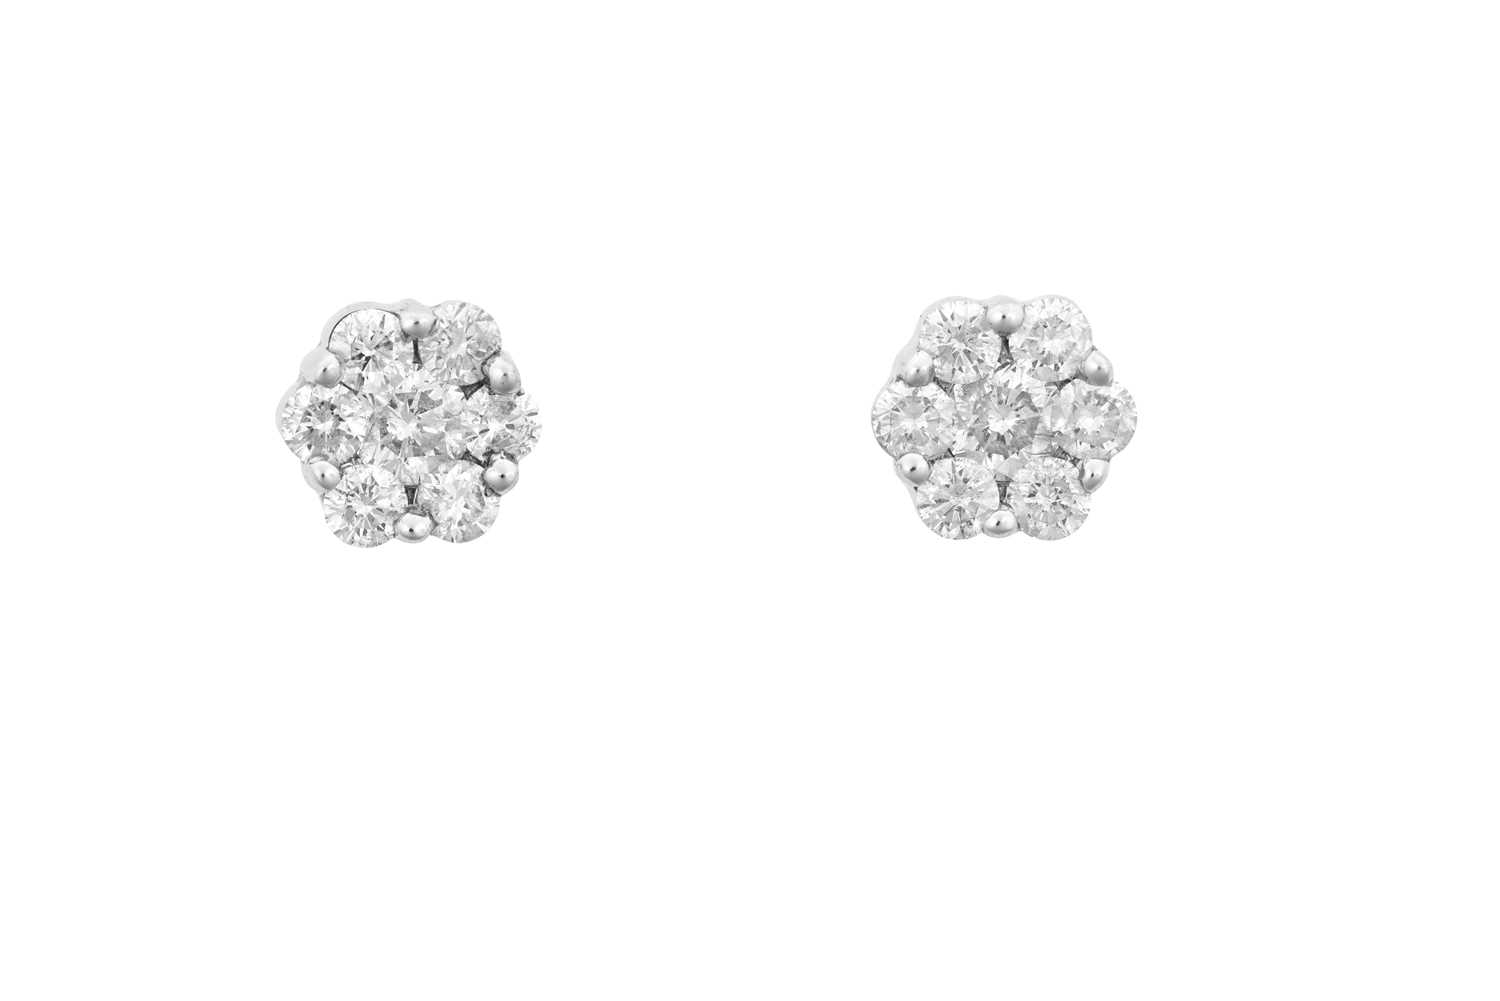 A Pair of Diamond Cluster Earrings the clusters formed of round brilliant cut diamonds, in white